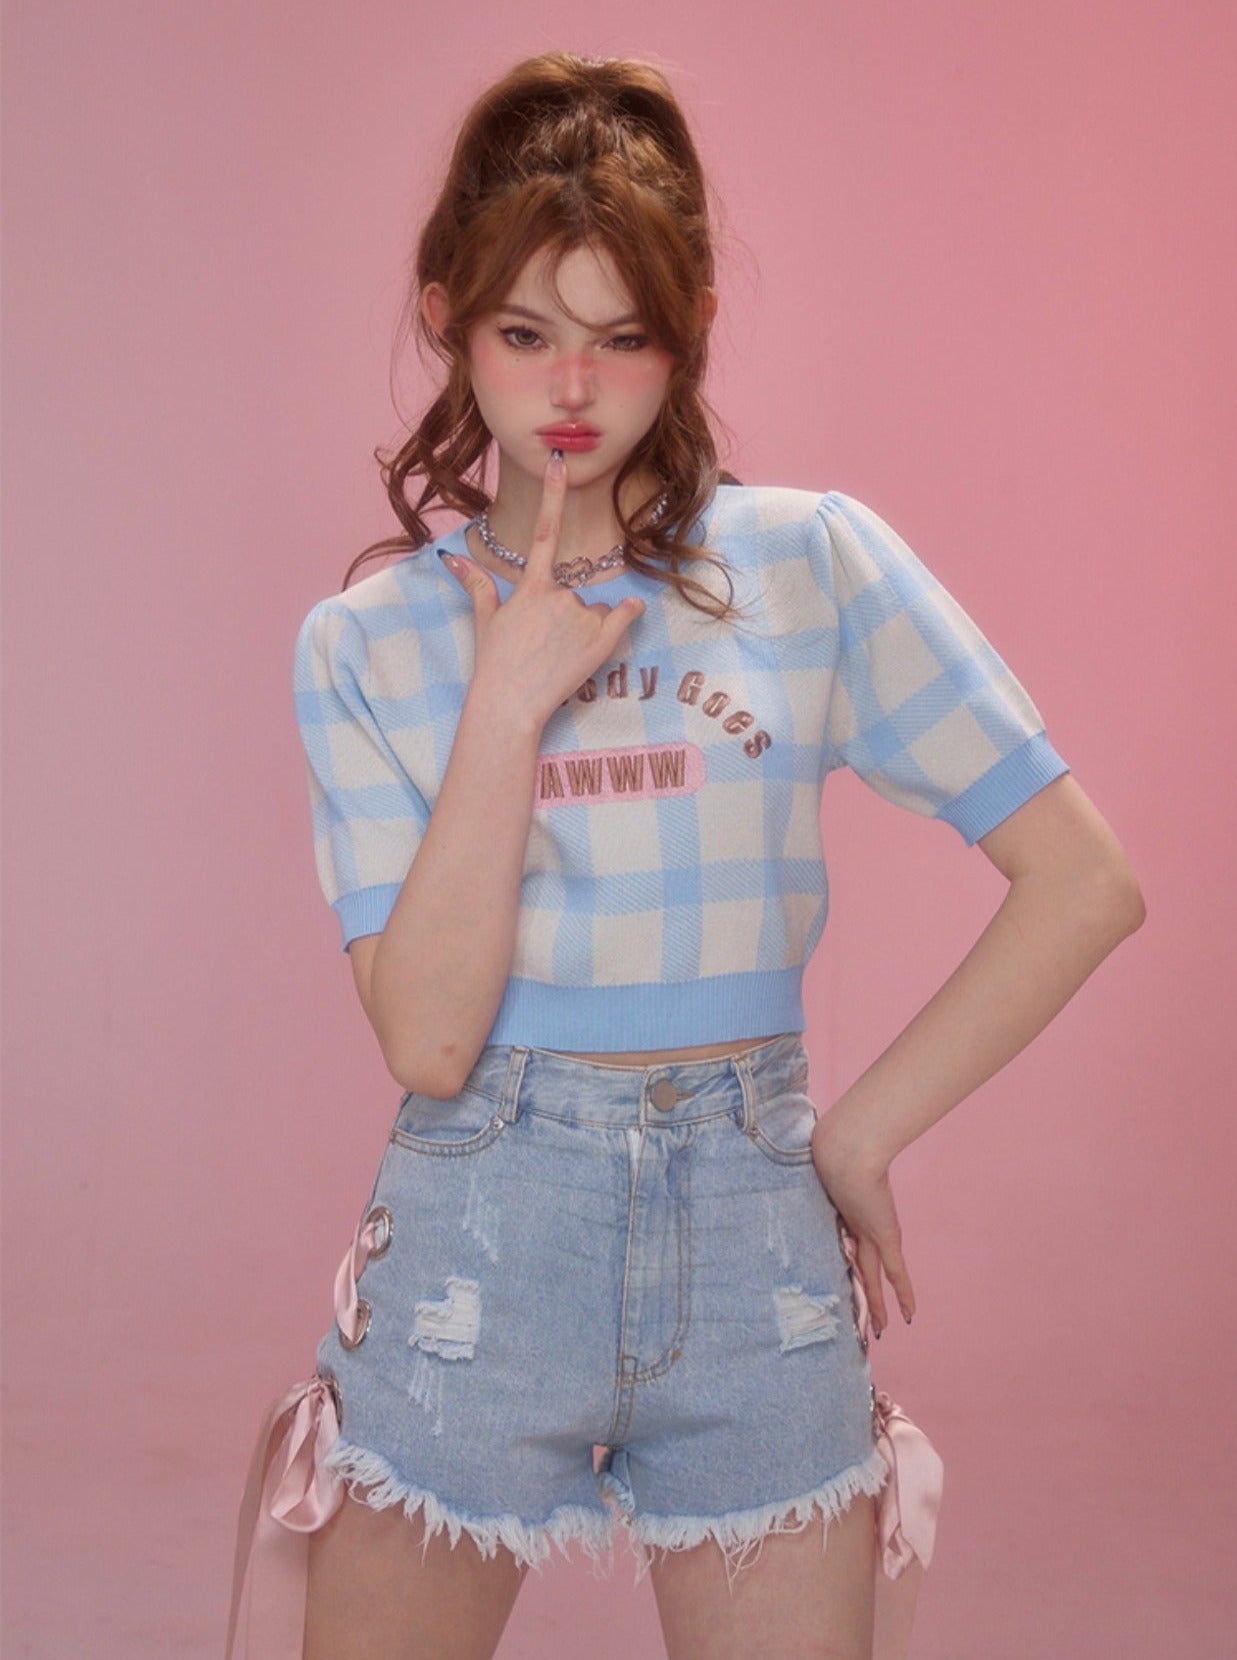 American Check Knit Top